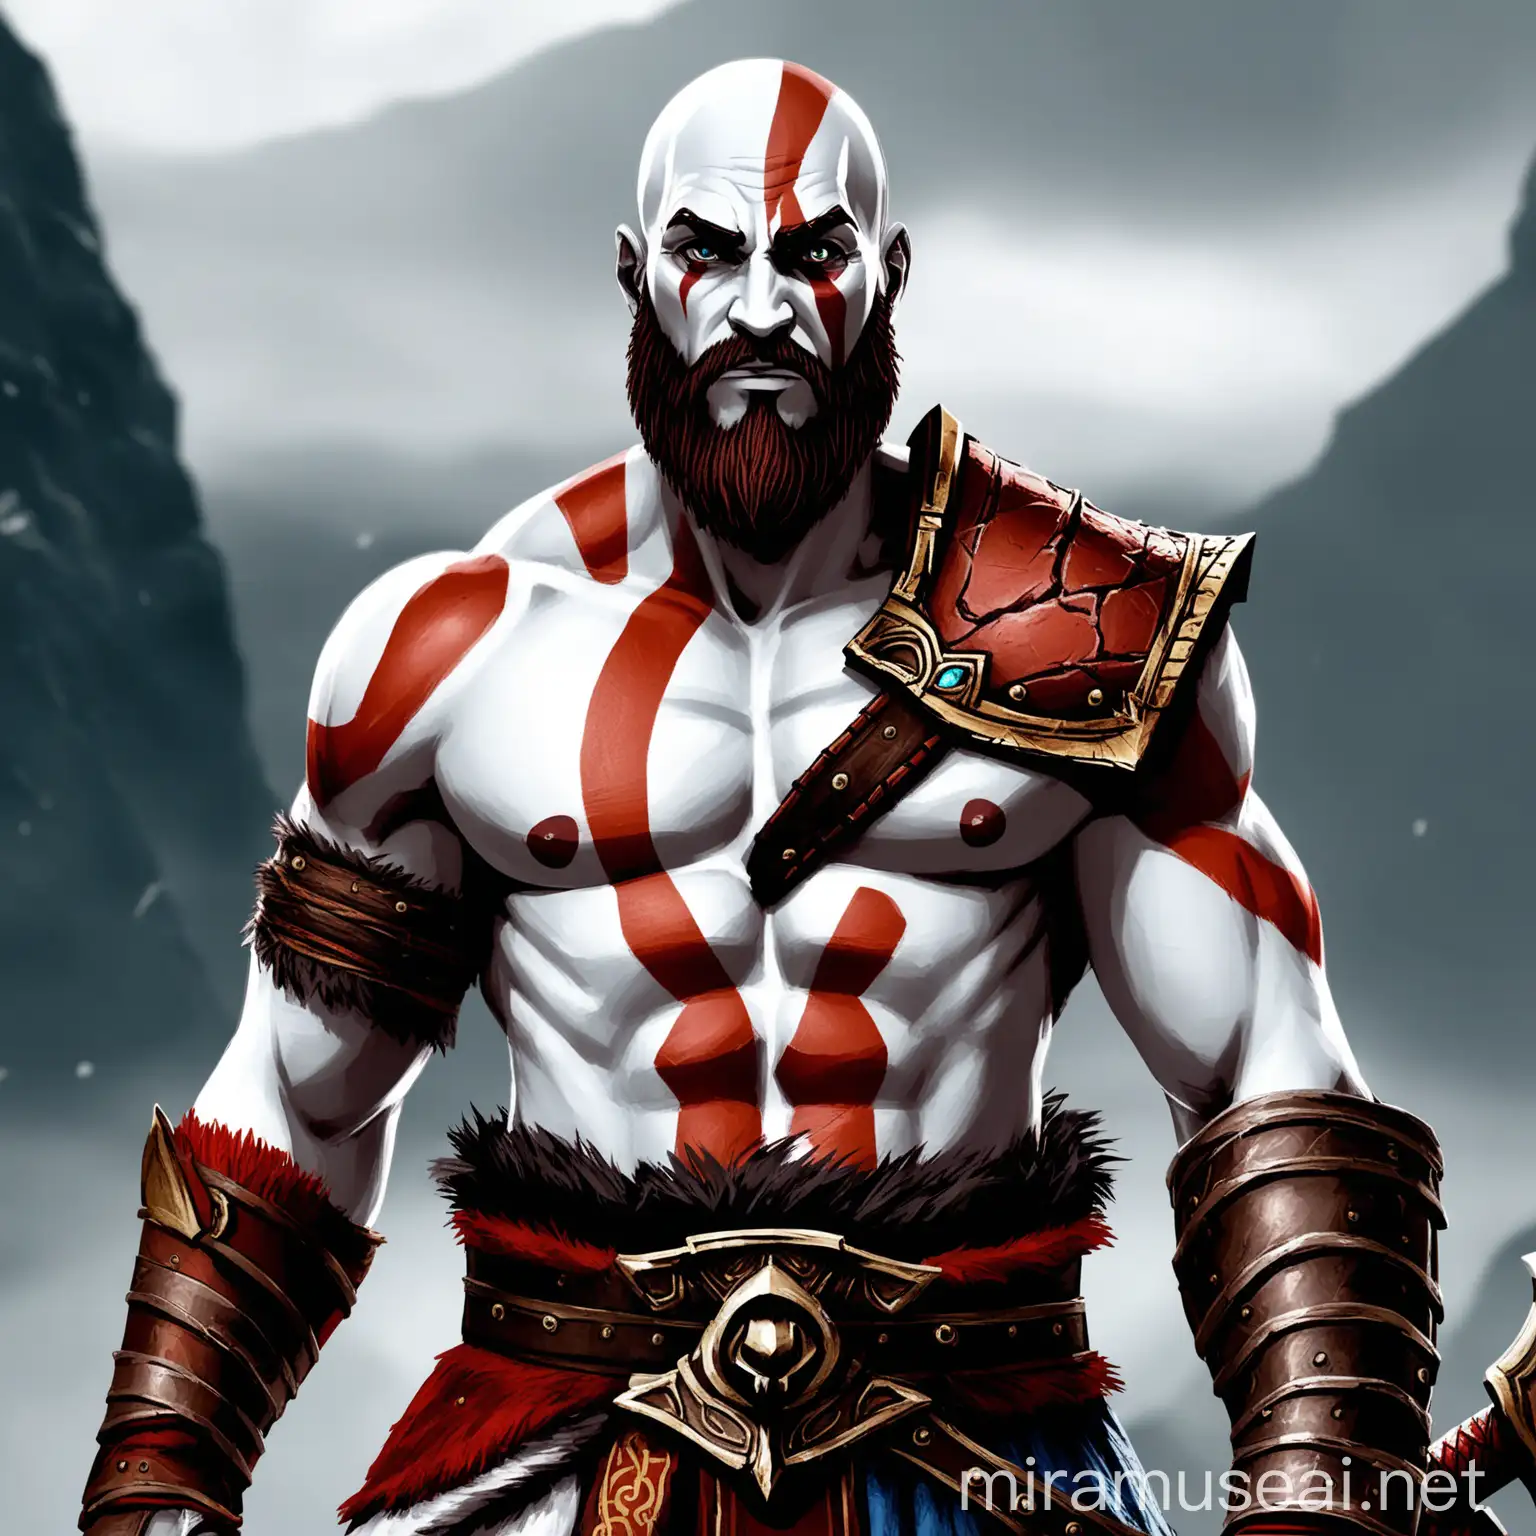 A frontal picture of kratos from god of war Ragnarok looking at the camera